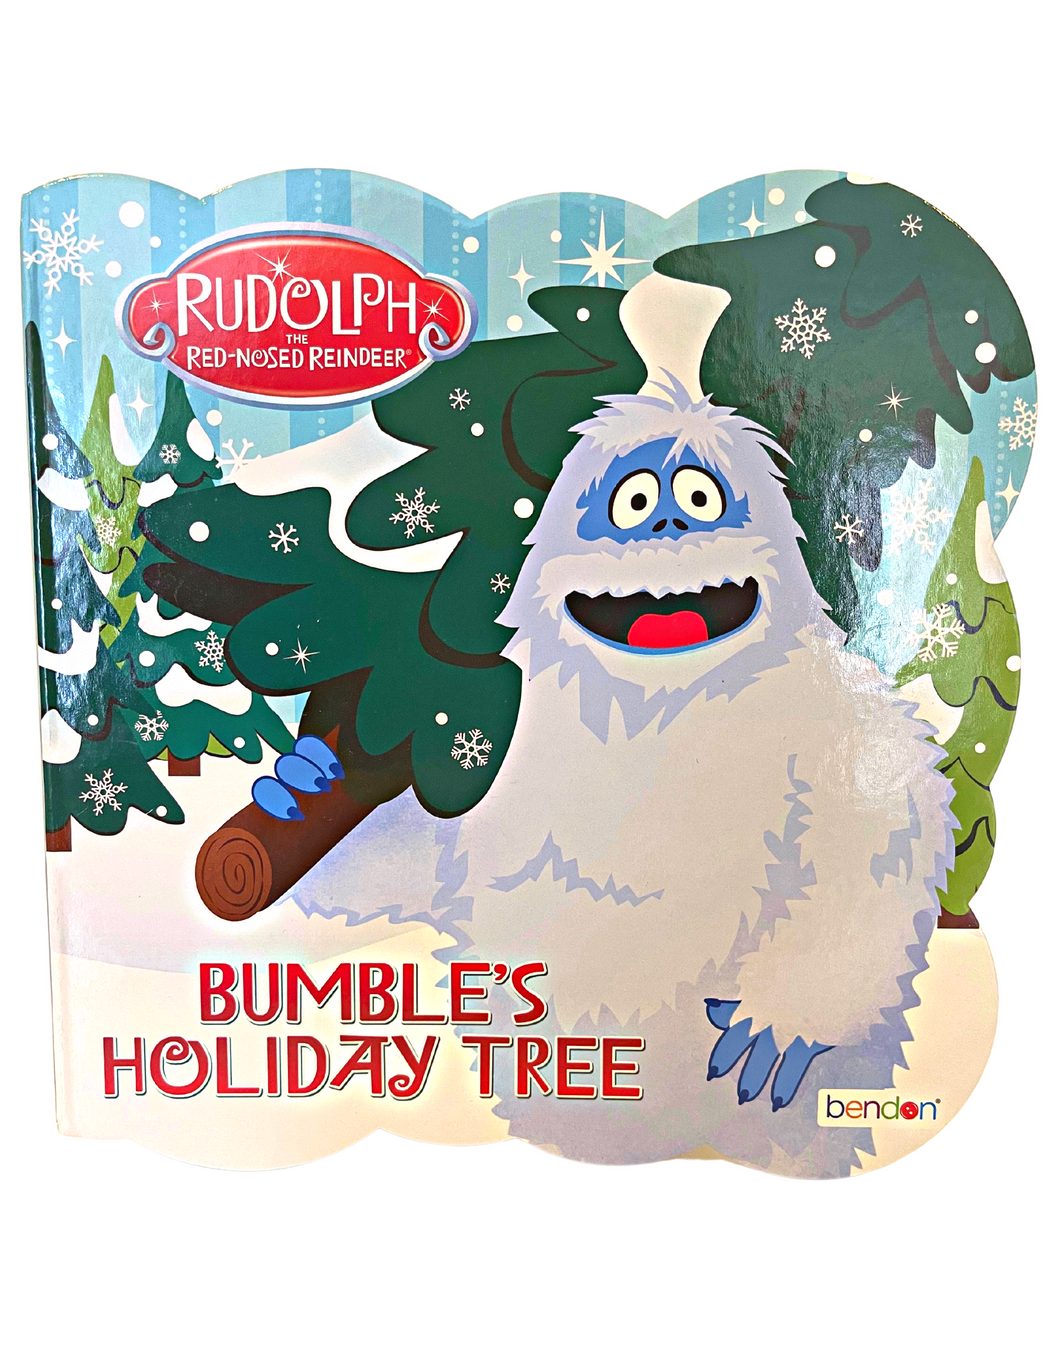 Rudolph the Red-Nosed Reindeer: Bumble's Holiday Tree (Board Book)